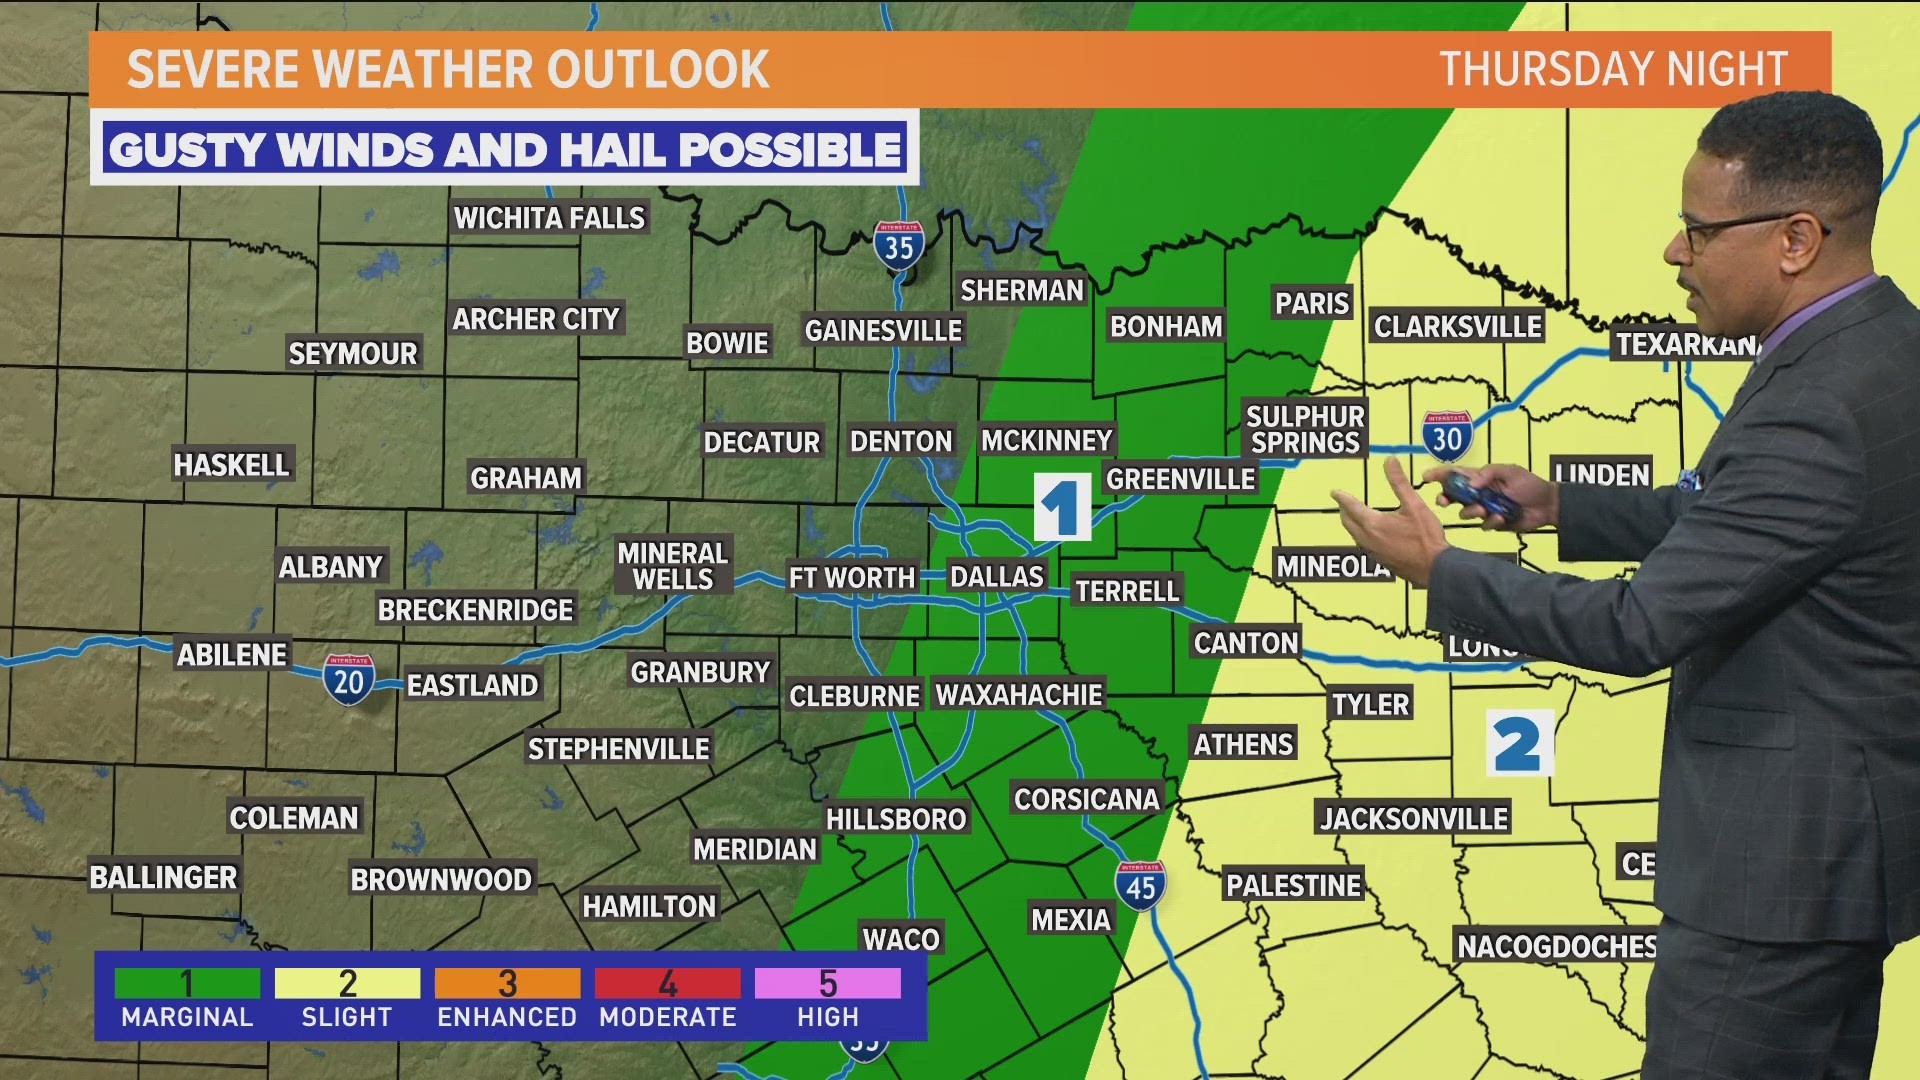 A couple of cold fronts over the next week bring storms and very cold air to North Texas.